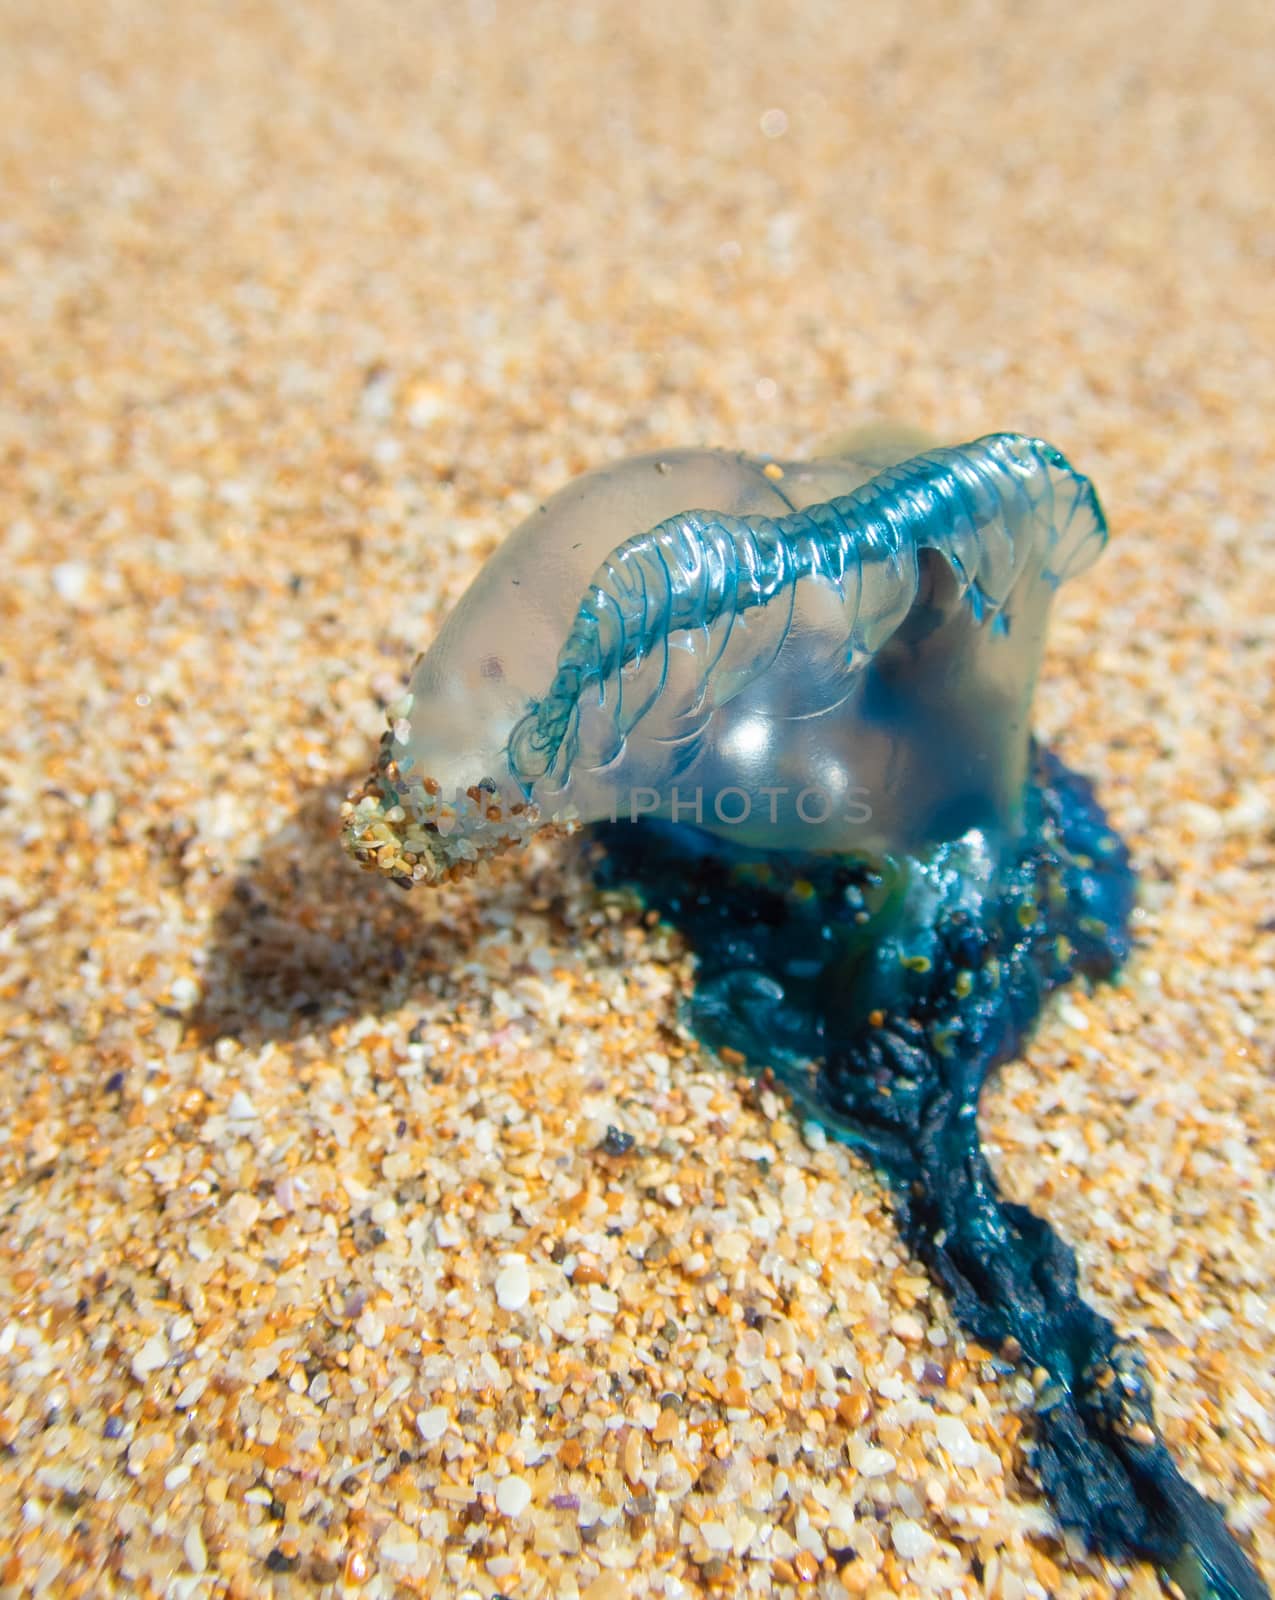 Blue bottle stinger washed up on the sand on a beach in summer. Closeup showing individual grains of sand